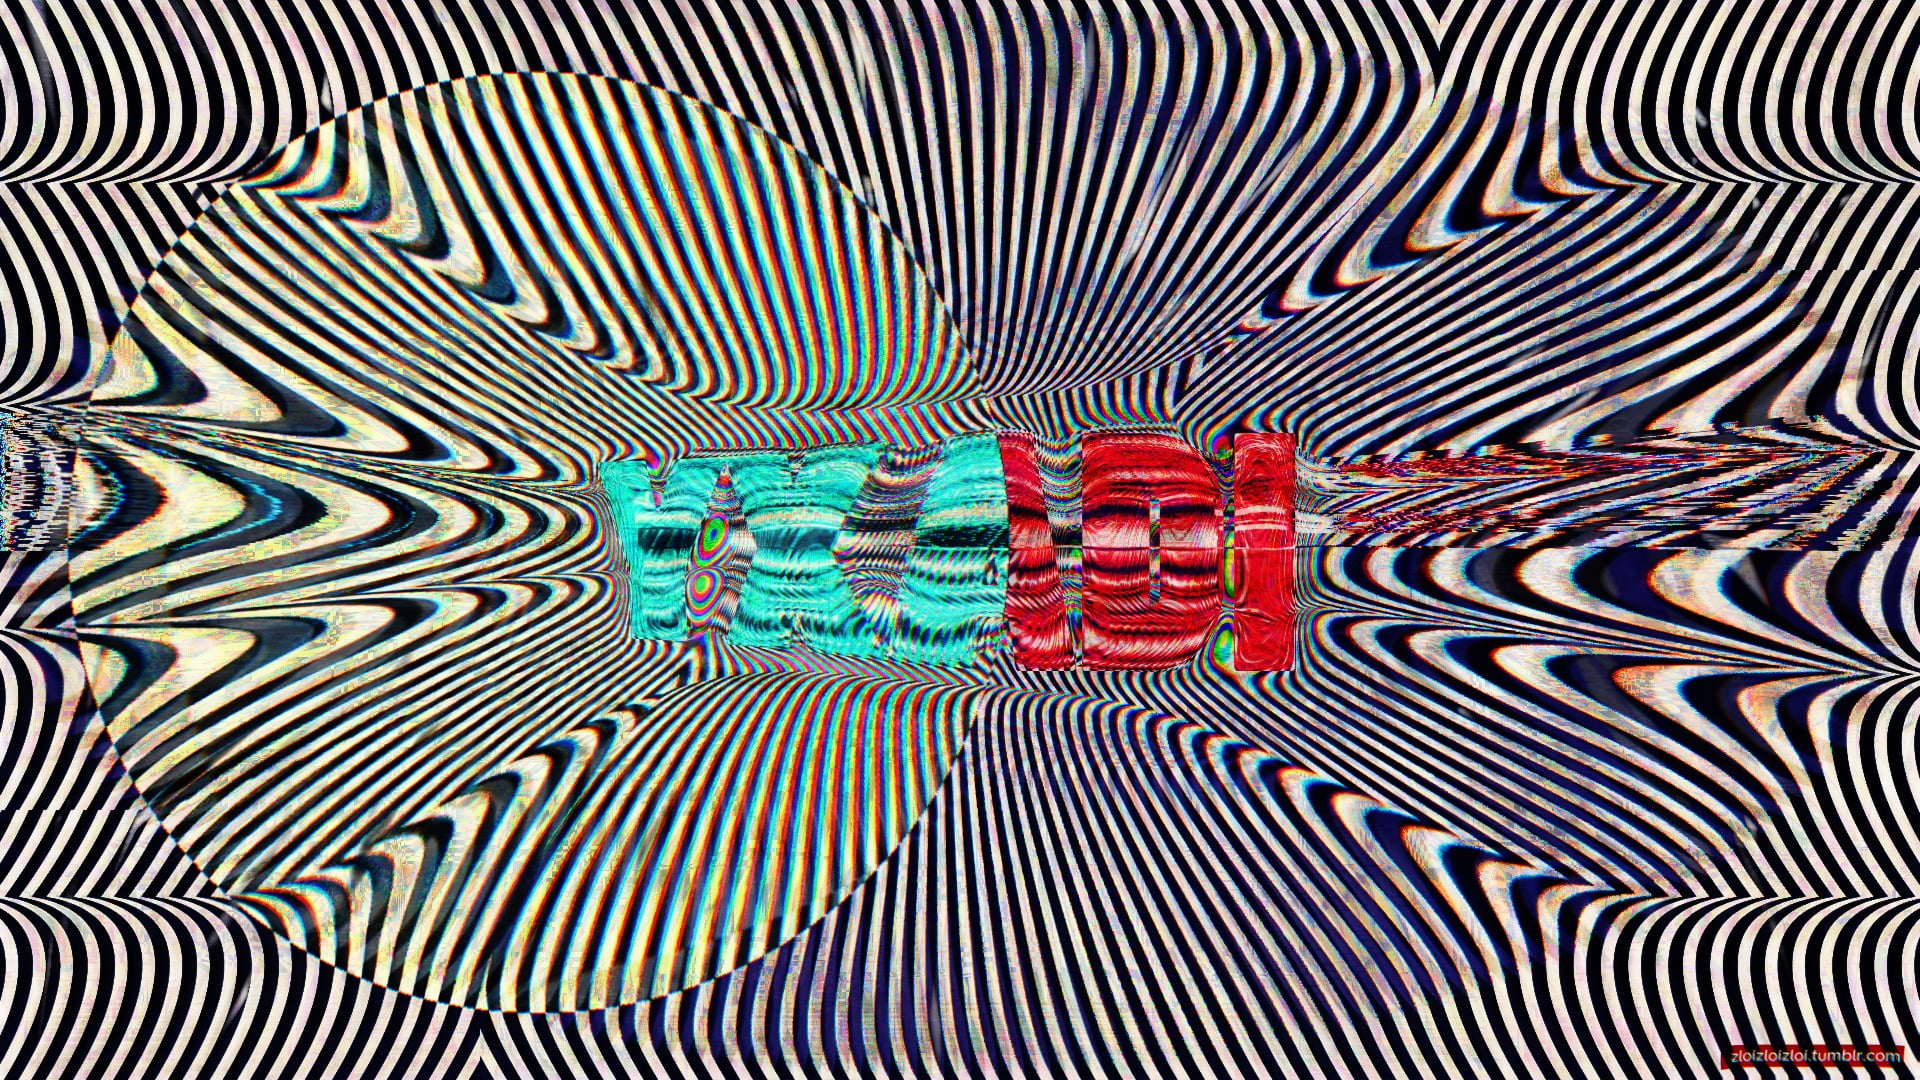 untitled, glitch art, abstract, text, LSD, pattern, full frame